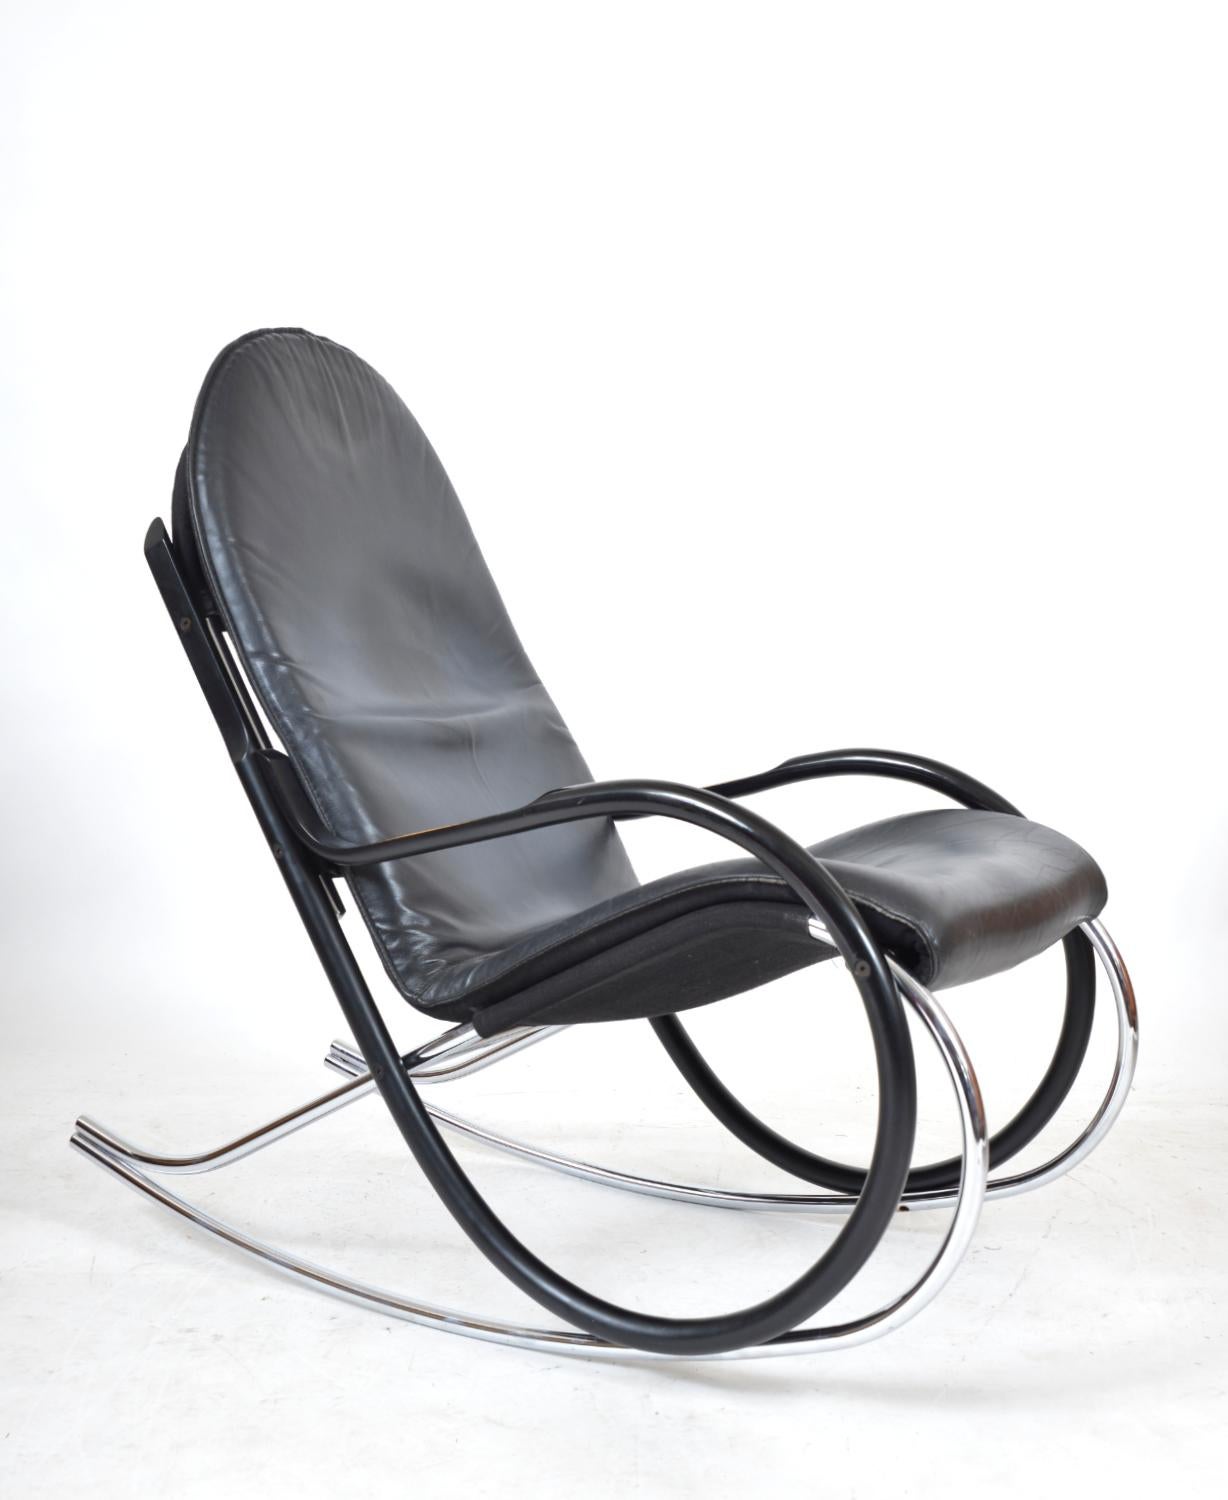 This is a fine example of a “Nonna” rocking chair designed by Paul Tuttle in 1972 for Strässle International, Switzerland. The materials used on this chair are an attractive combination of tubular chrome, ebonised bentwood, leather and canvas. The